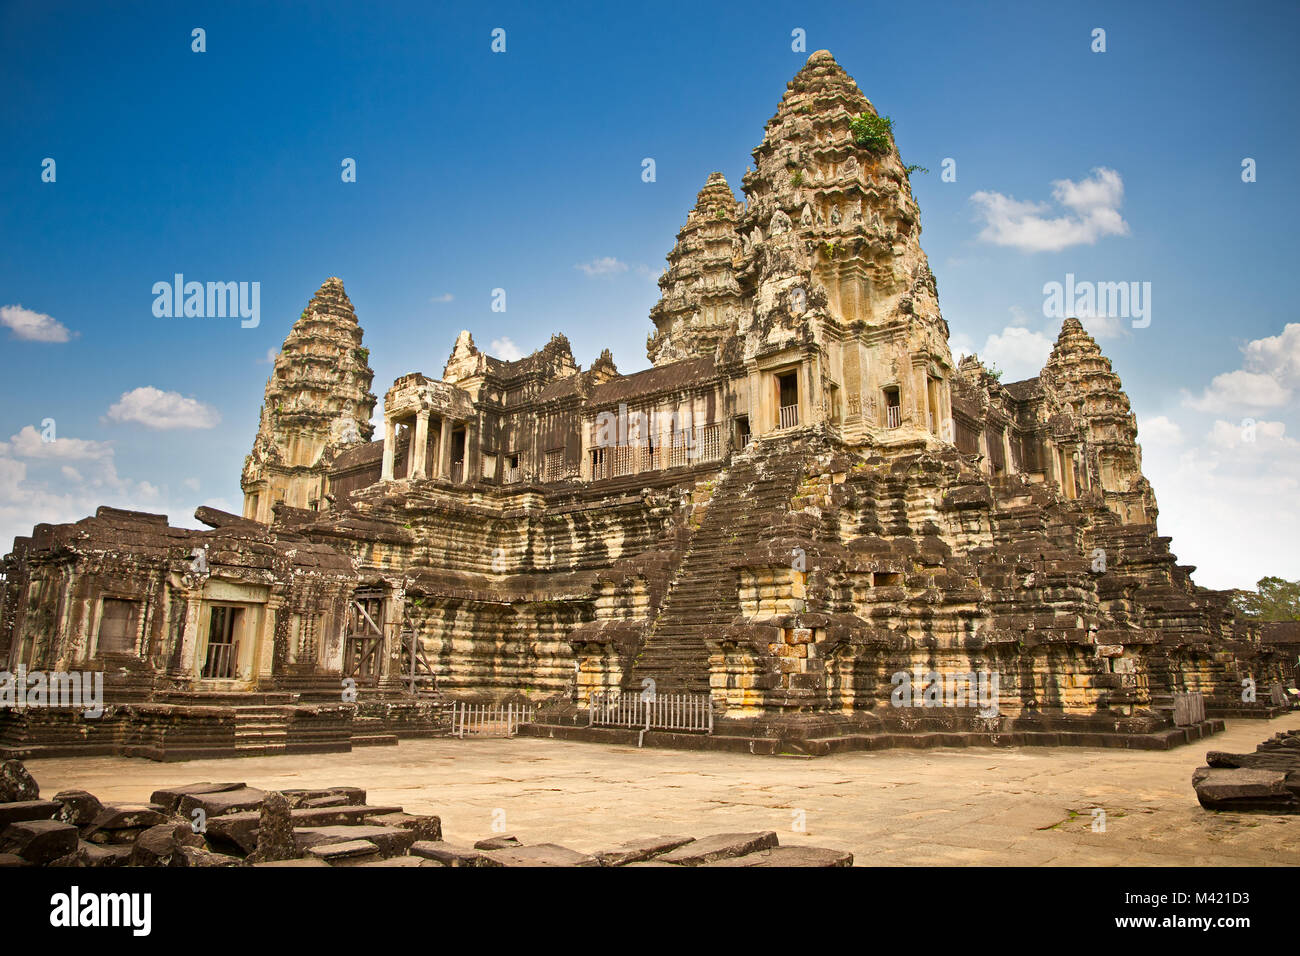 Famous Angkor Wat temple complex, near Siem Reap, Cambodia. Stock Photo